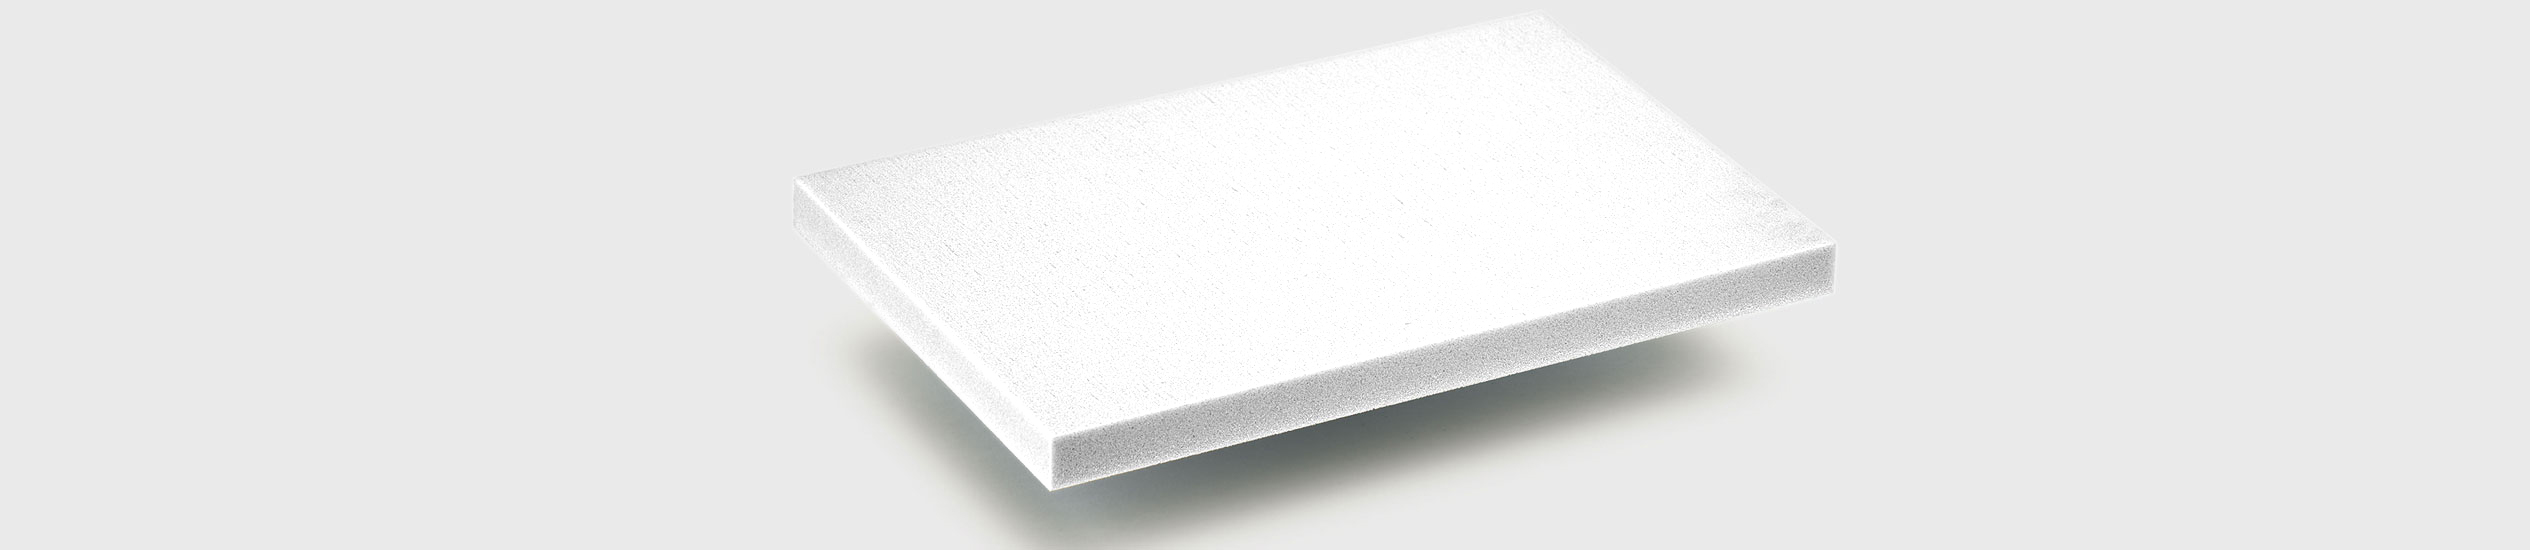 PMI (polymethacrylimide) RS foam is specially developed for use as a structural core in connection with vacuum infusion processes.